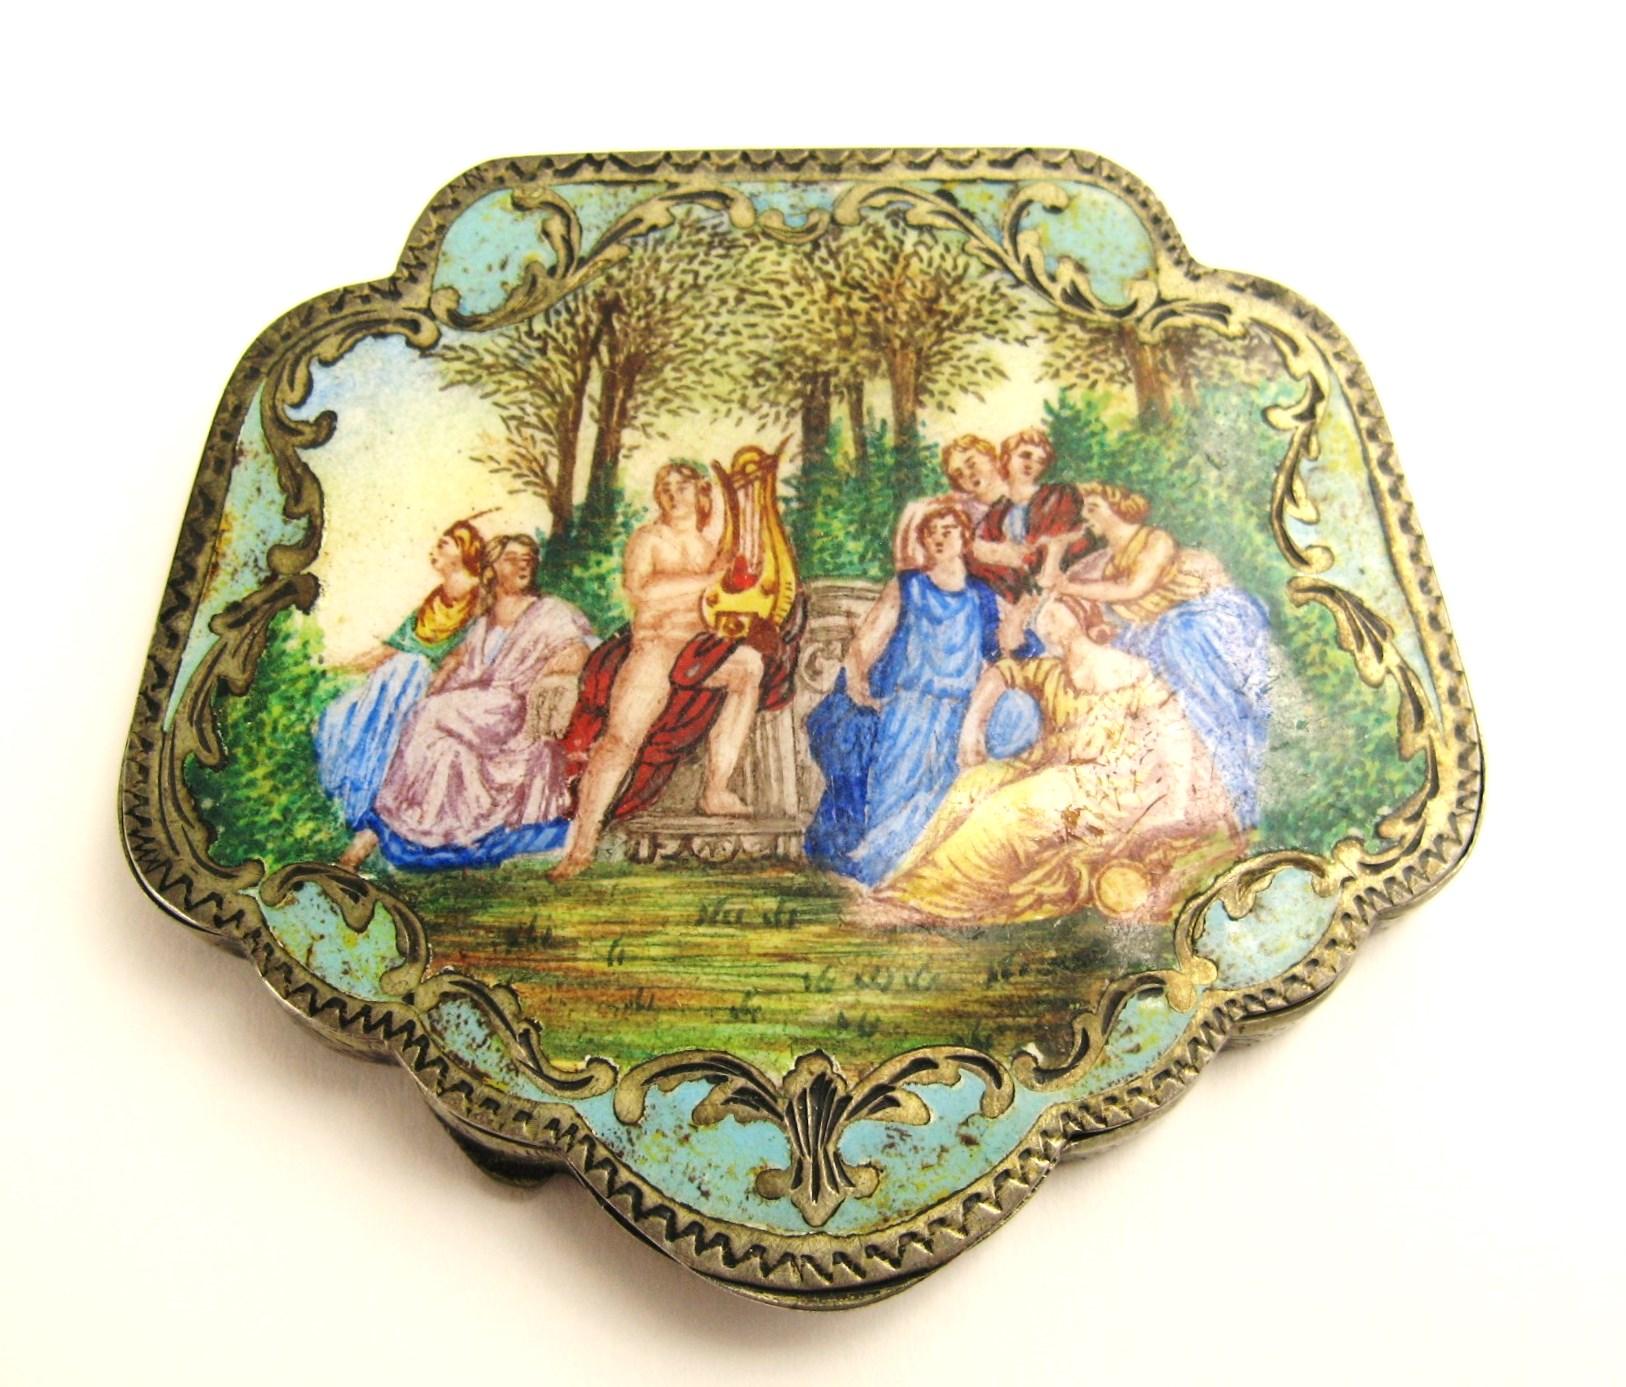 Antique Silver Enamel Figures Garden Scene Compact In Good Condition For Sale In Wallkill, NY